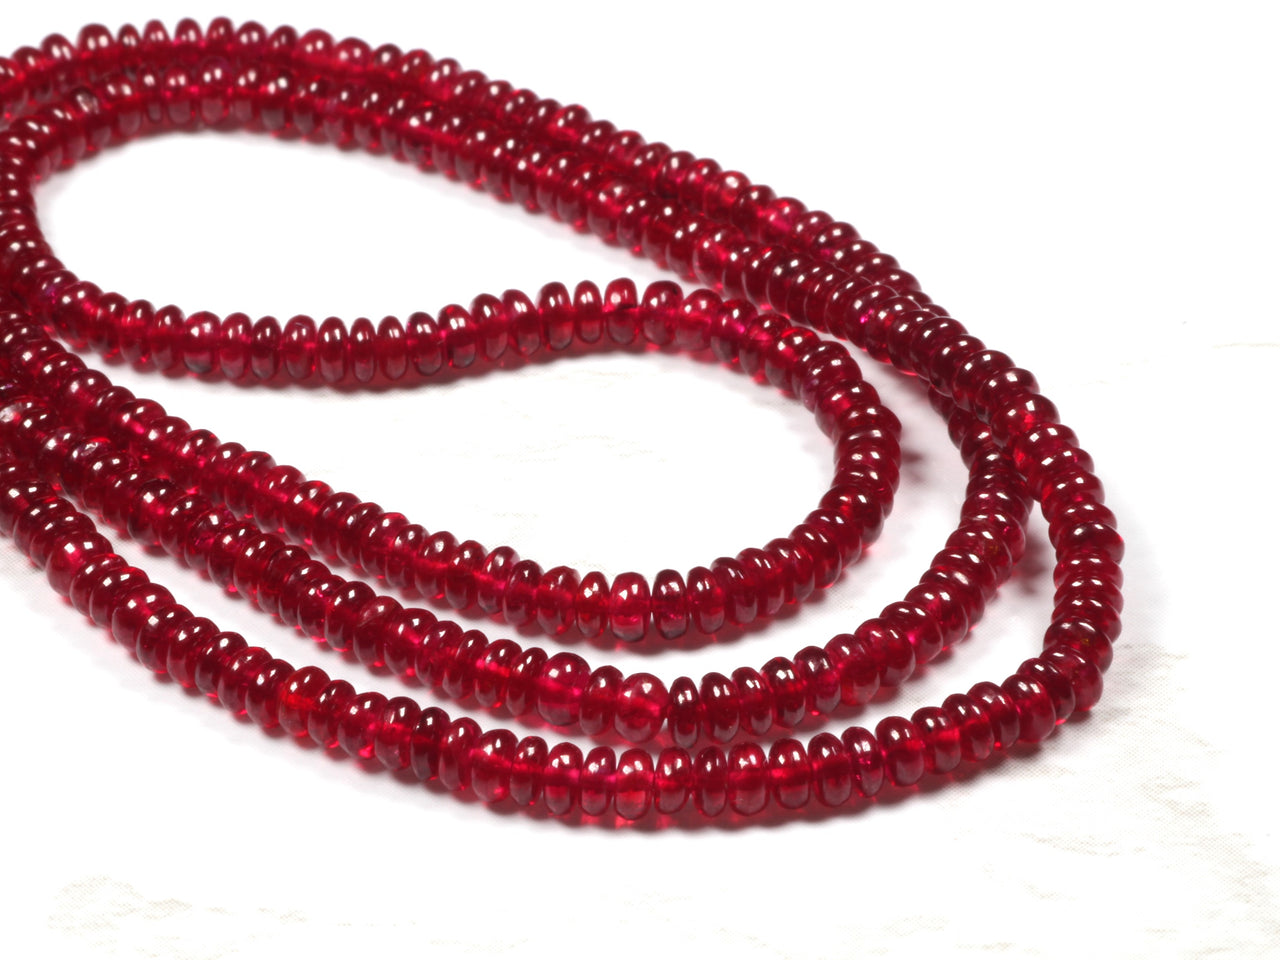 AAA Red Ruby 3mm Smooth Rondelles Bead Strand